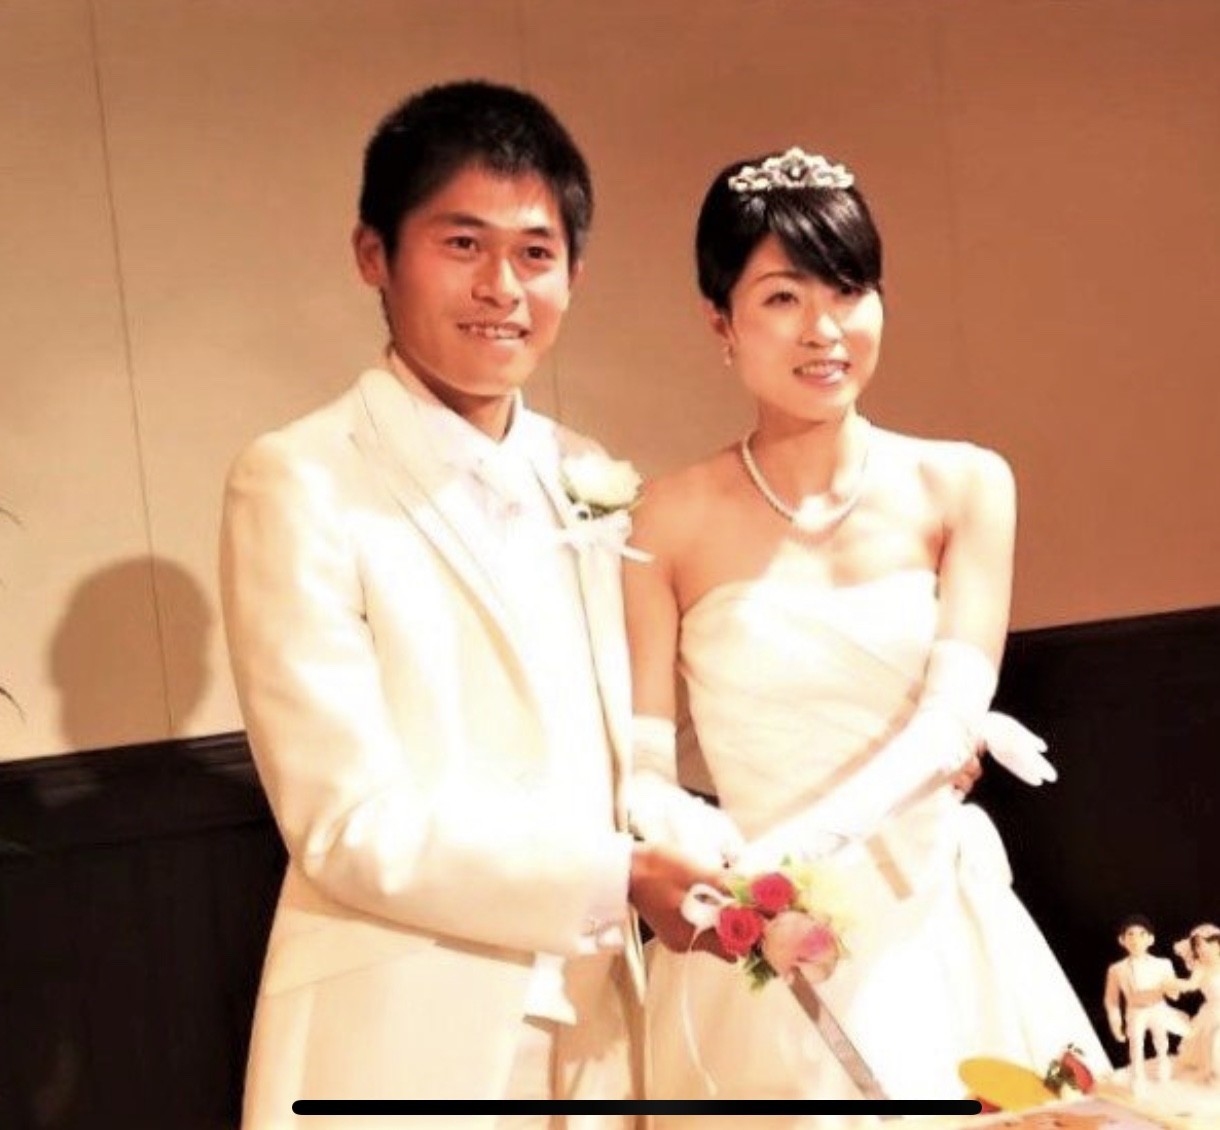 Yuki and Yuko have known each other for 11 years and today they got married